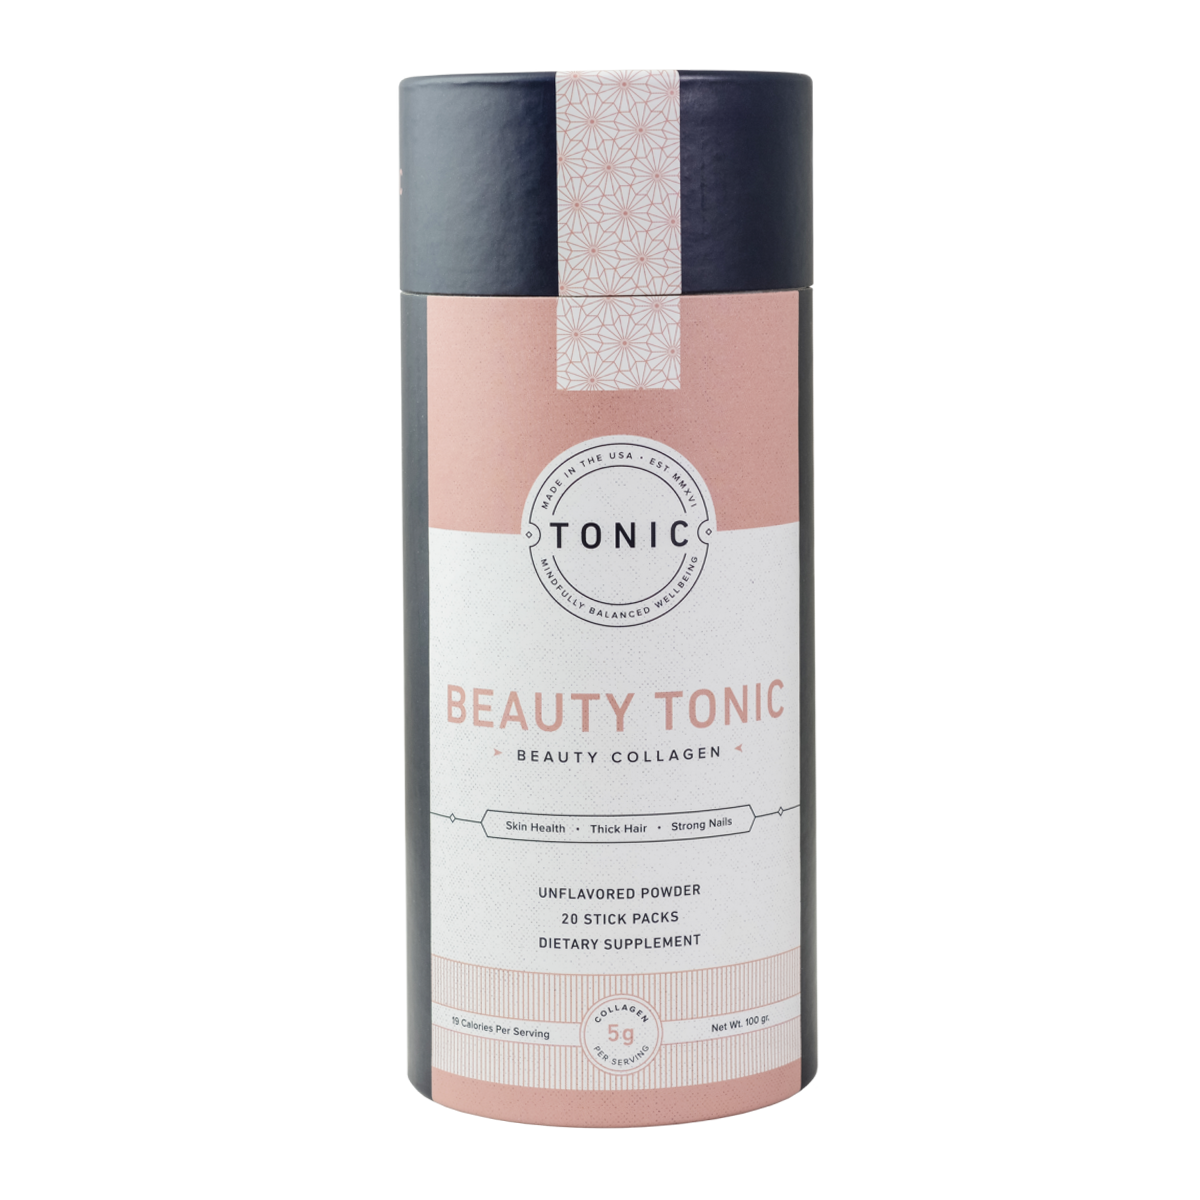 Beauty Tonic Collagen Peptides by Tonic